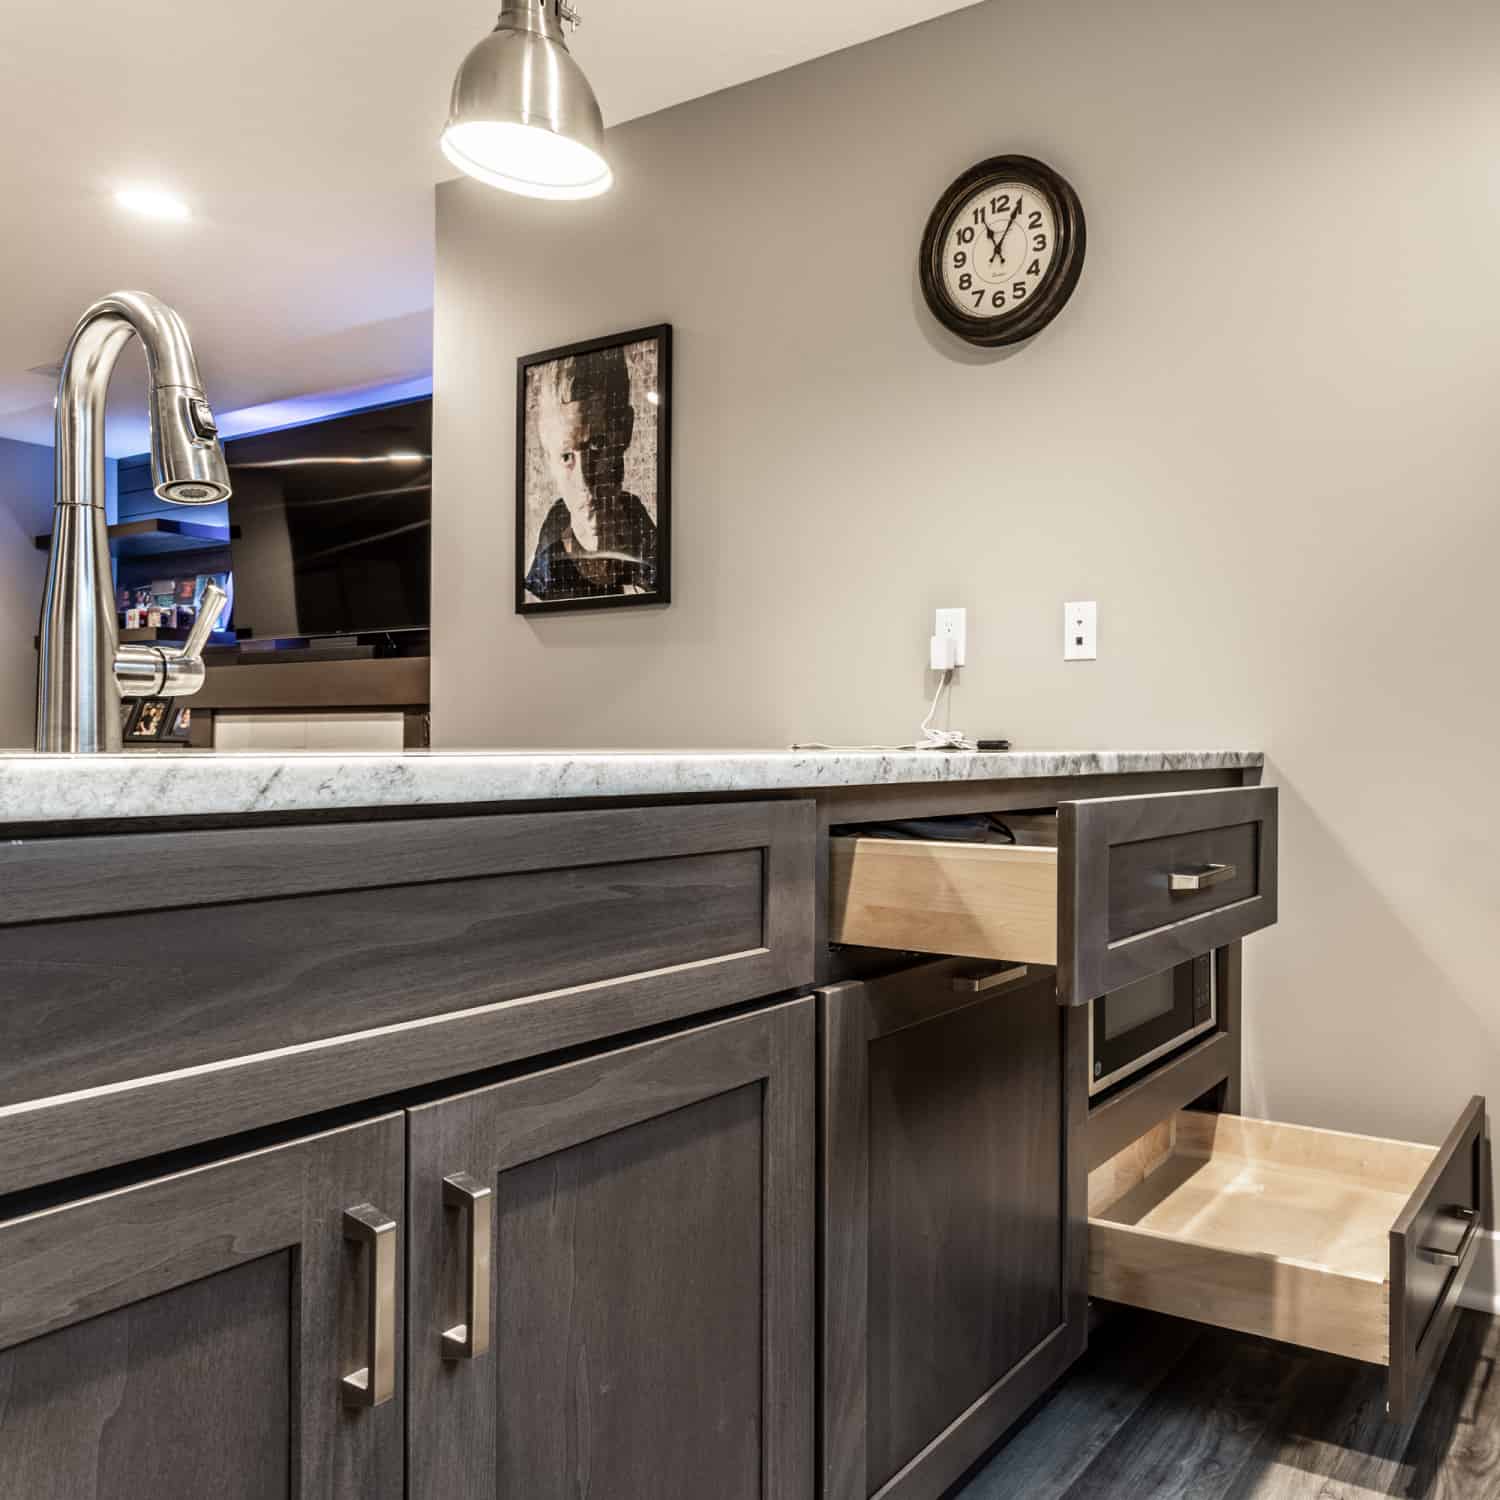 Nicholas Design Build | A kitchen with gray cabinets and a clock on the wall.